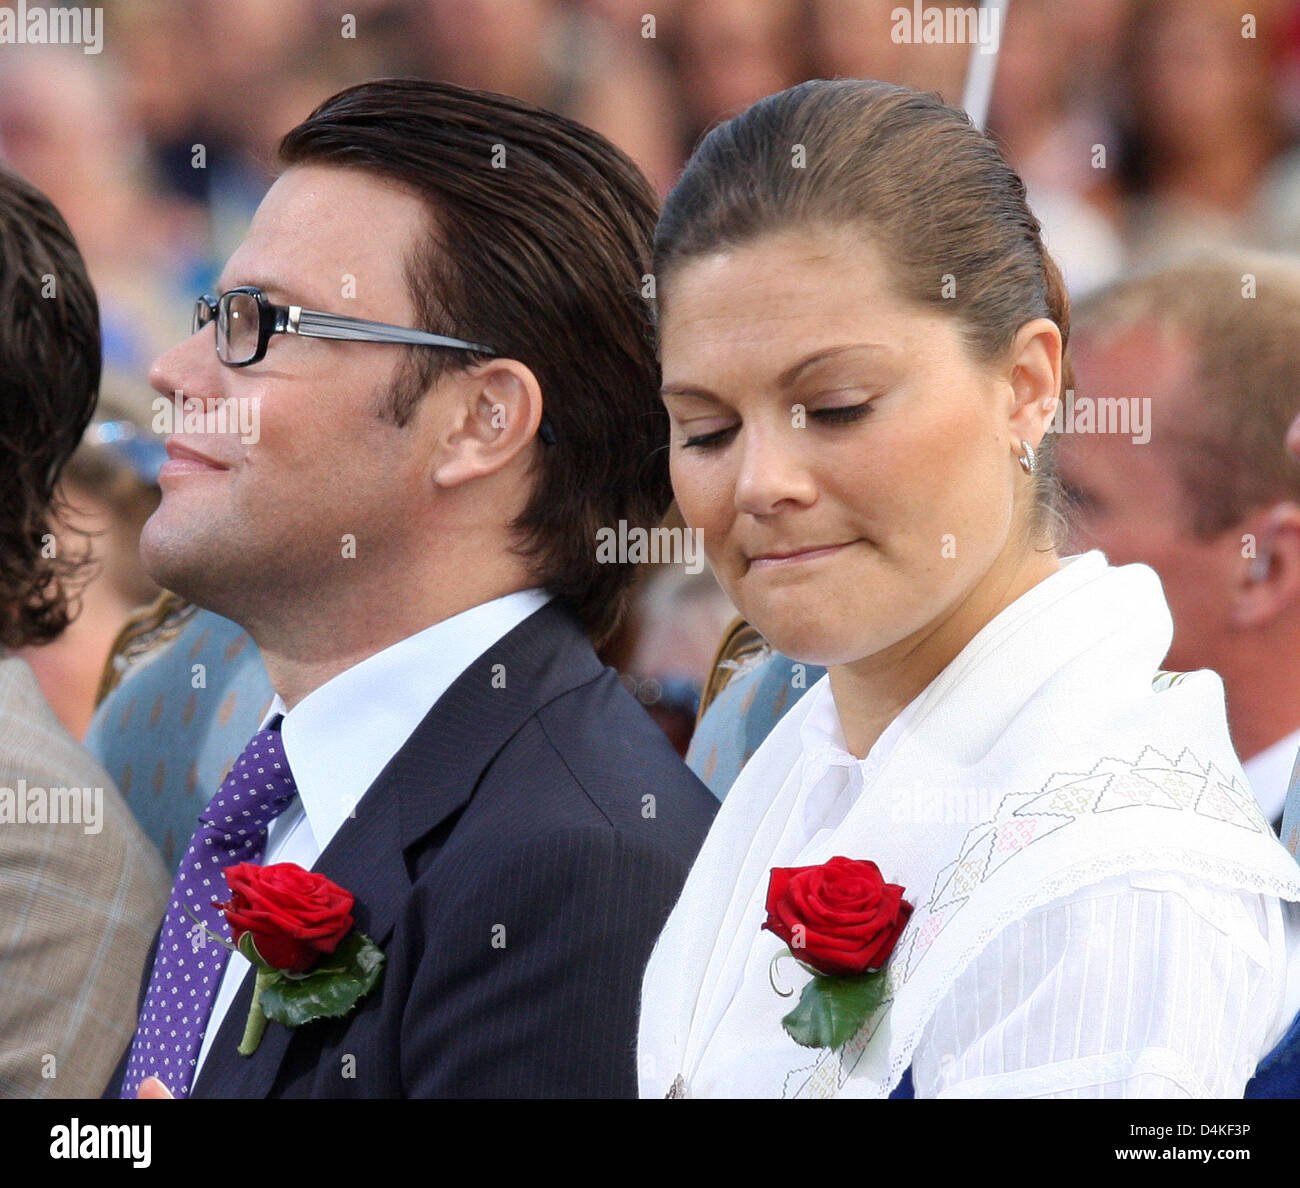 Crown Princess Victoria of Sweden and her fiancé Daniel Westling attend a concert in celebration of her 32nd birthday in Borgholm, on the island of Oeland, Sweden, 14 July 2009. Photo: Albert Nieboer (NETHERLANDS OUT) Stock Photo